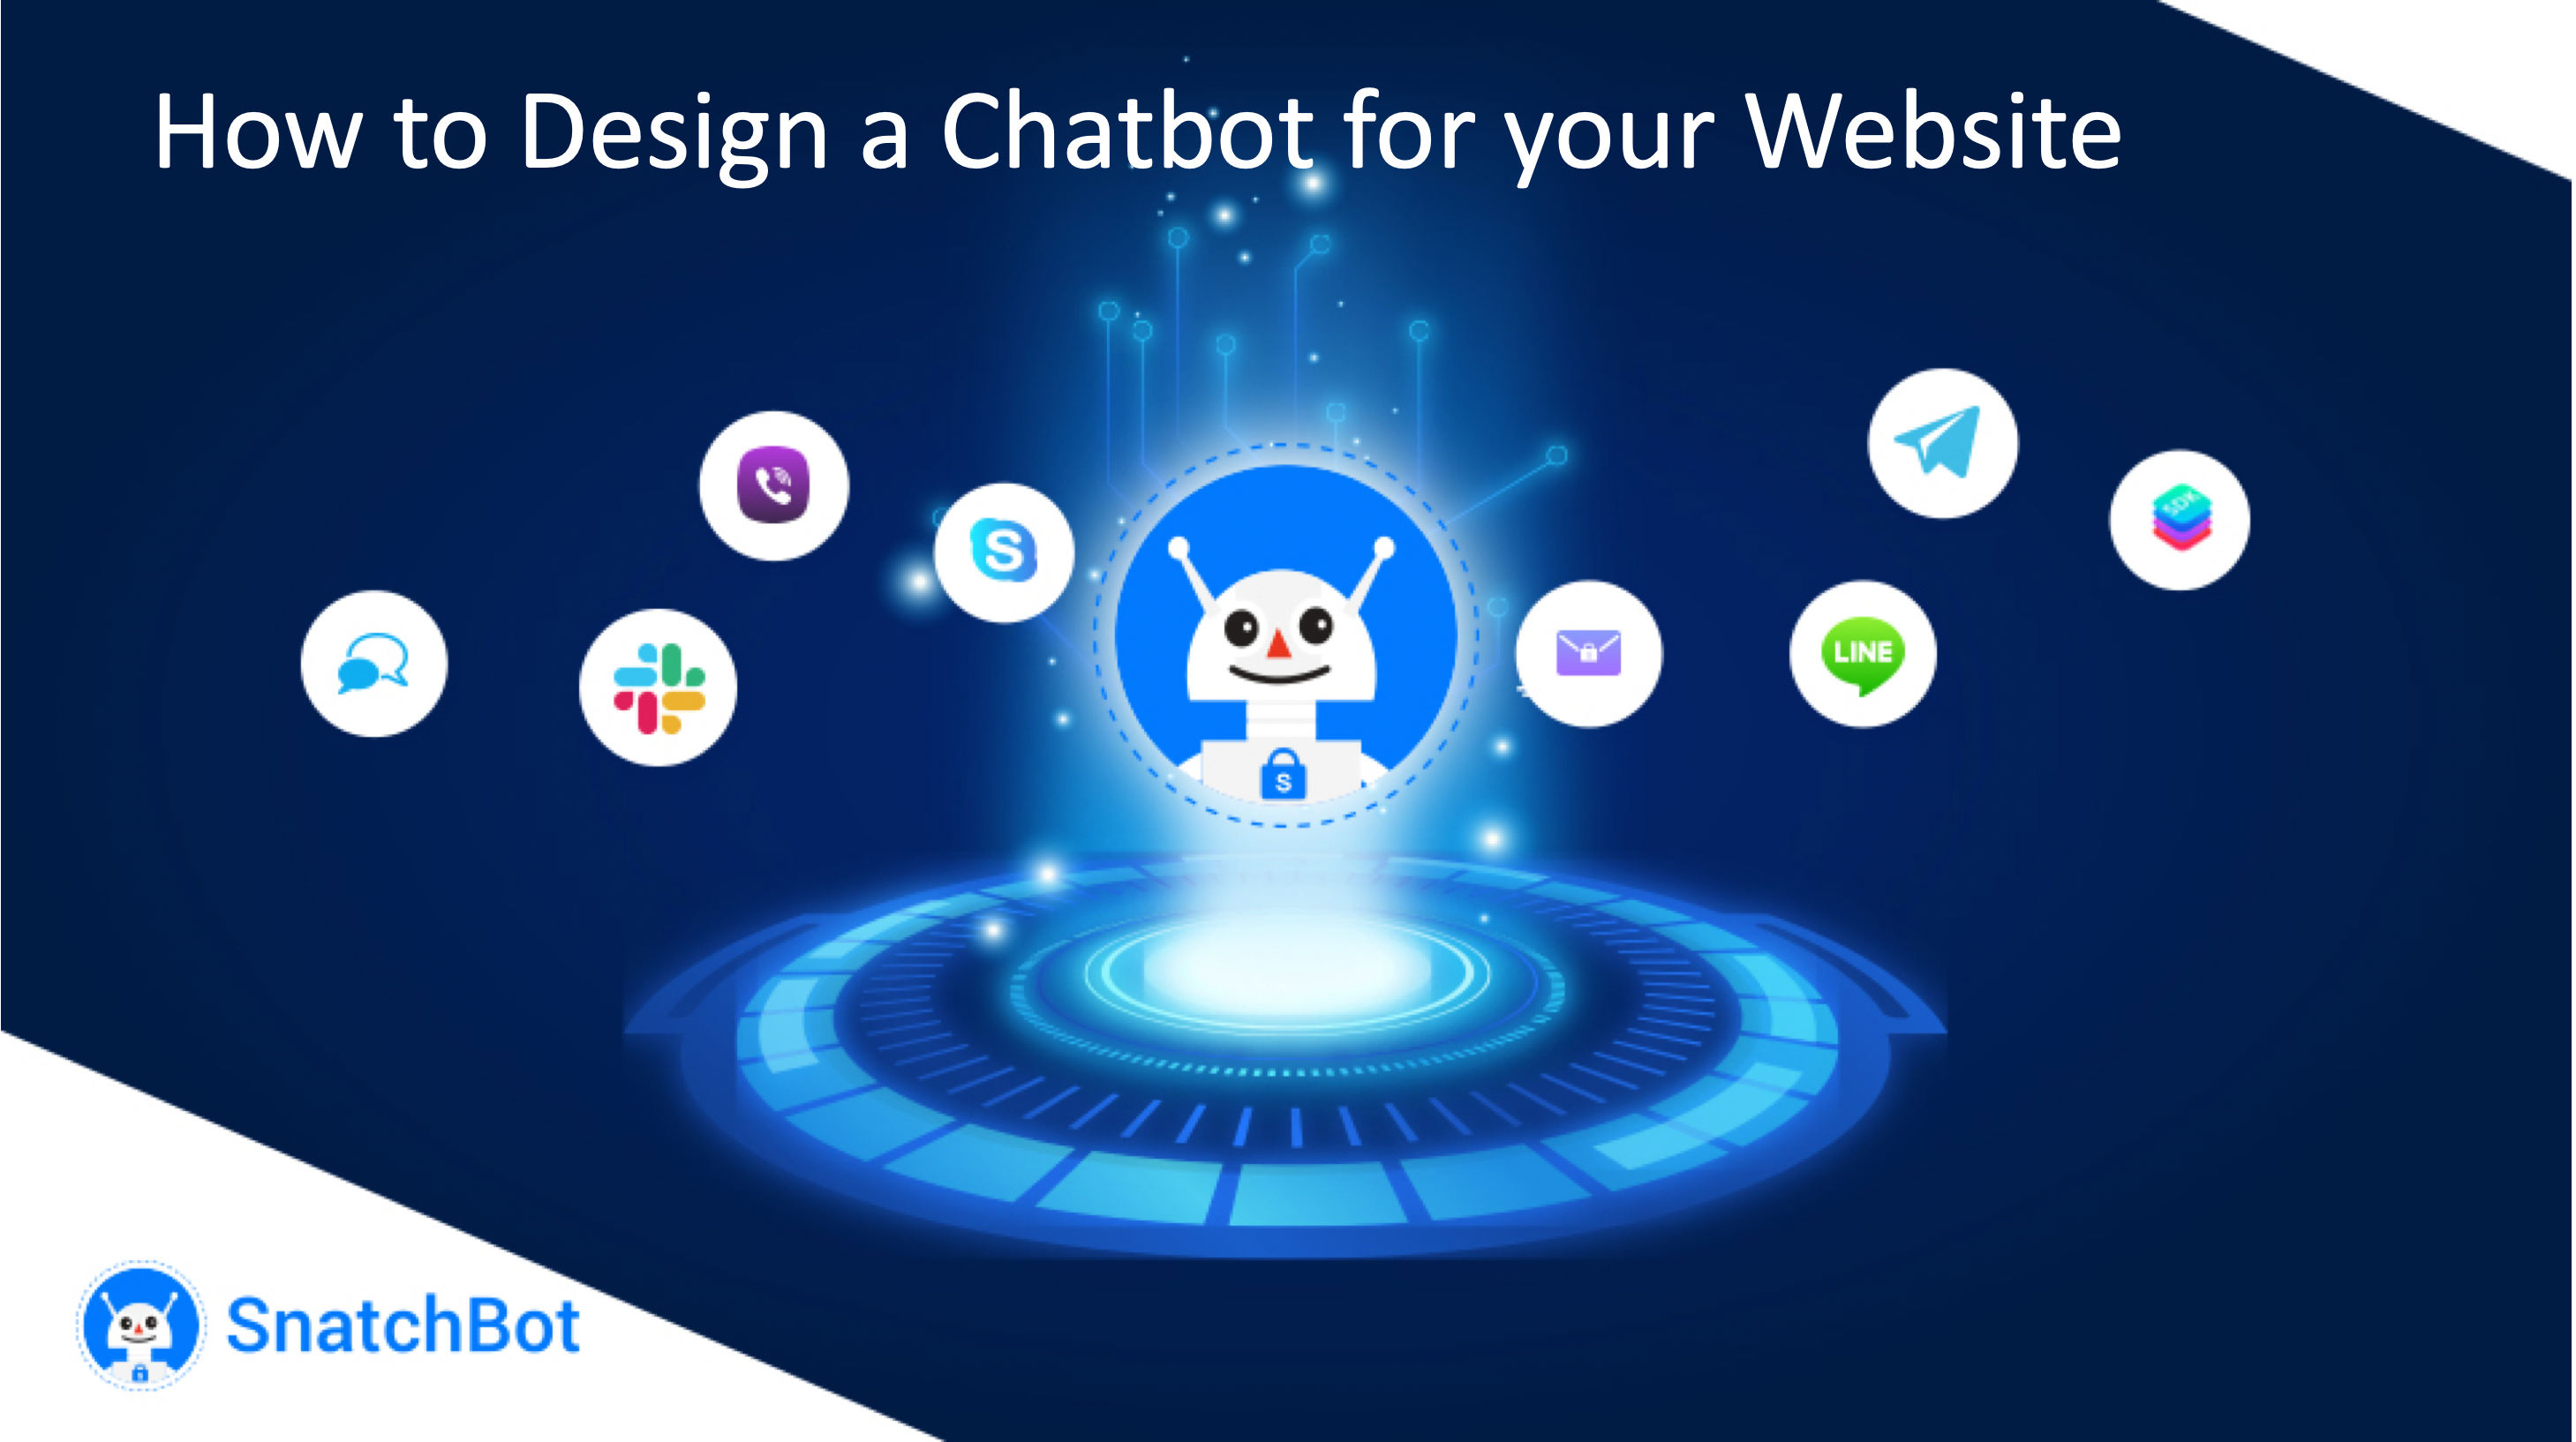 How to Design a Chatbot for your Website